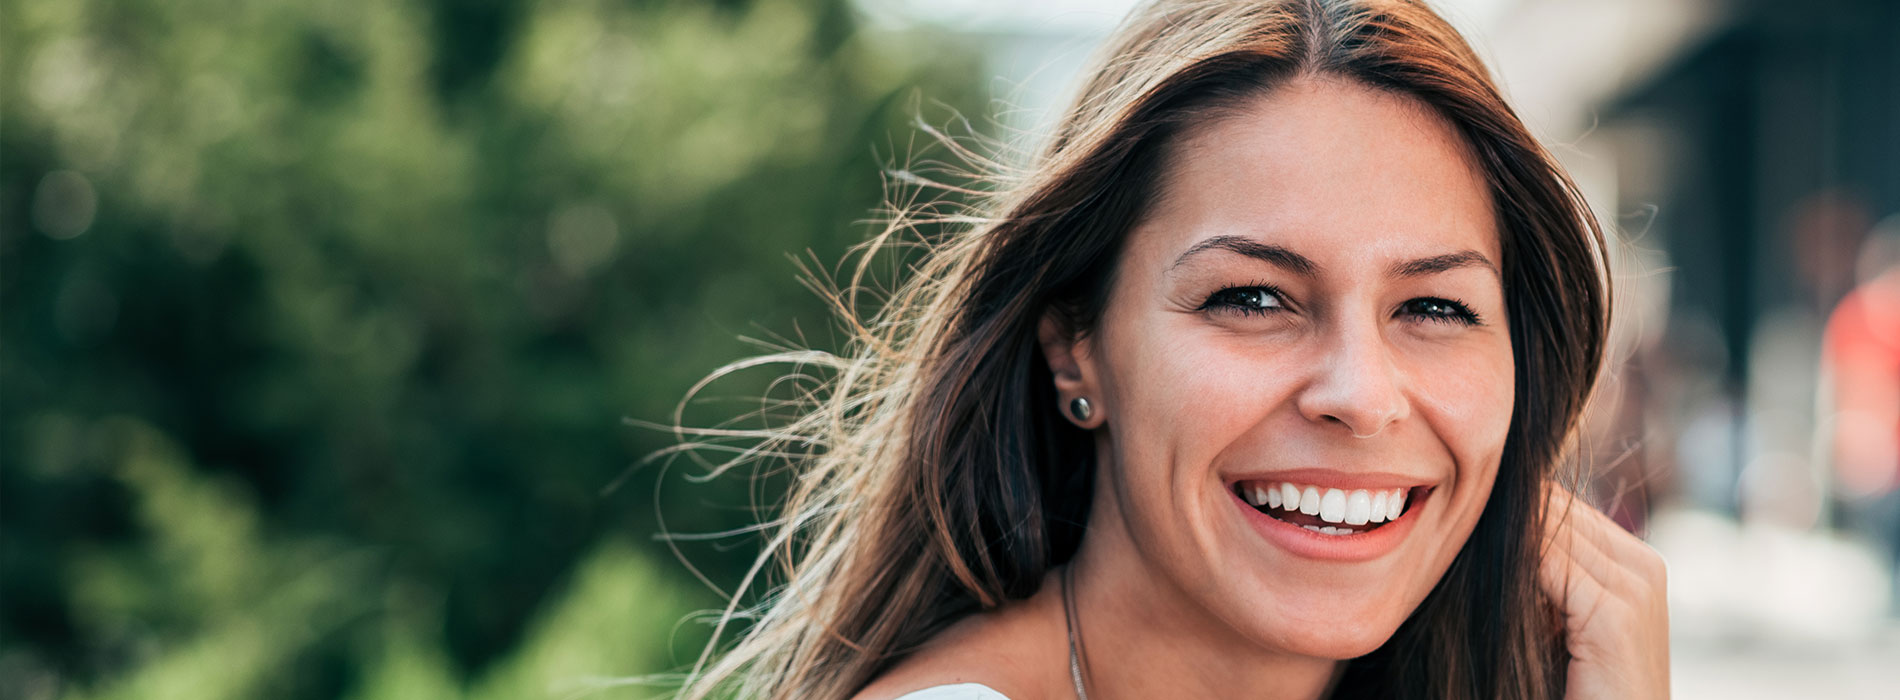 Owings Mills Dental Care | Teeth Whitening, Implant Dentistry and Preventative Program